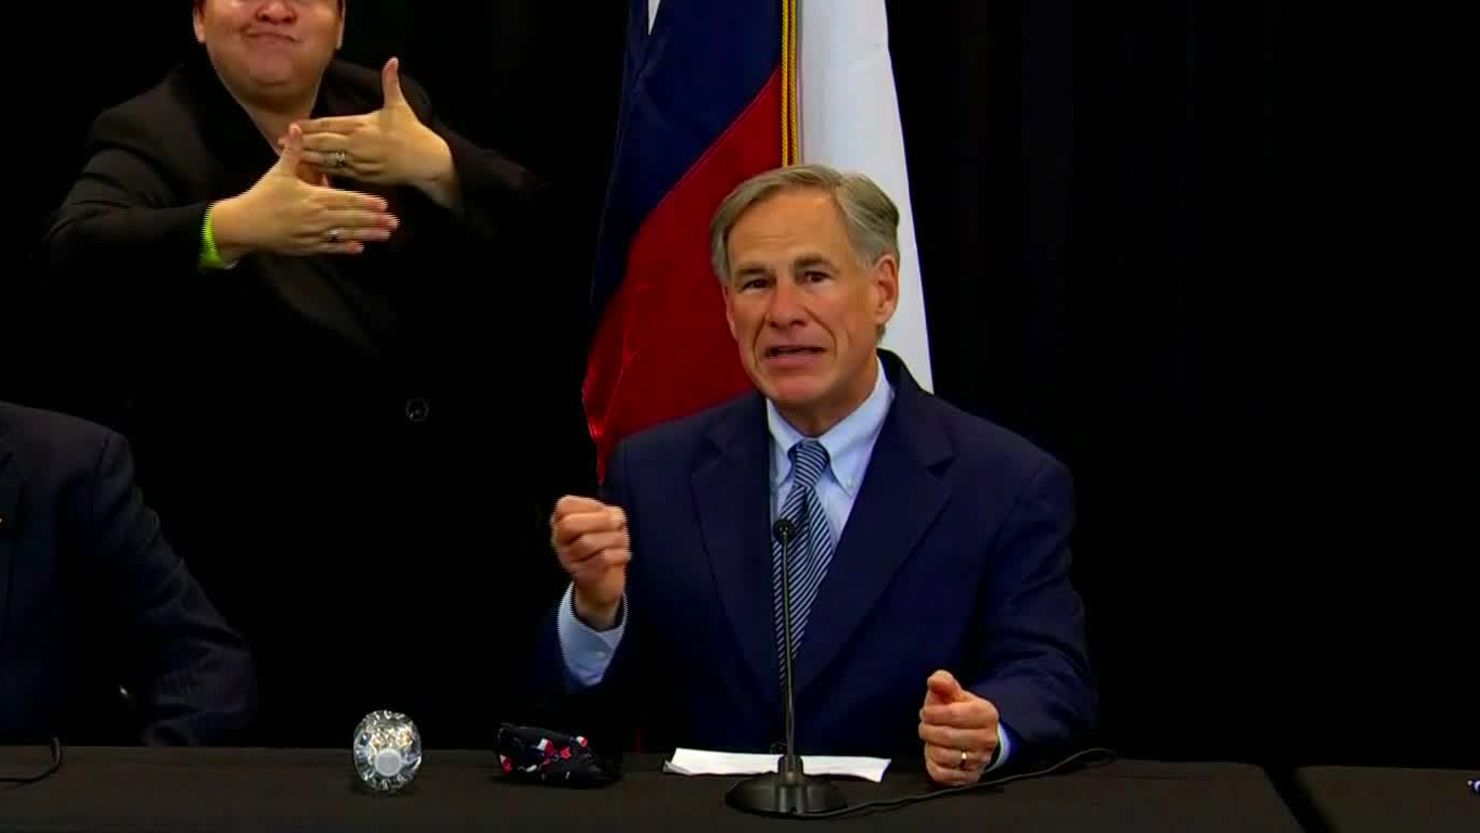 Texas Gov. Greg Abbott warned cities that defund their police departments that the state will freeze their property taxes, a move meant to deter cities from shrinking police budgets. 